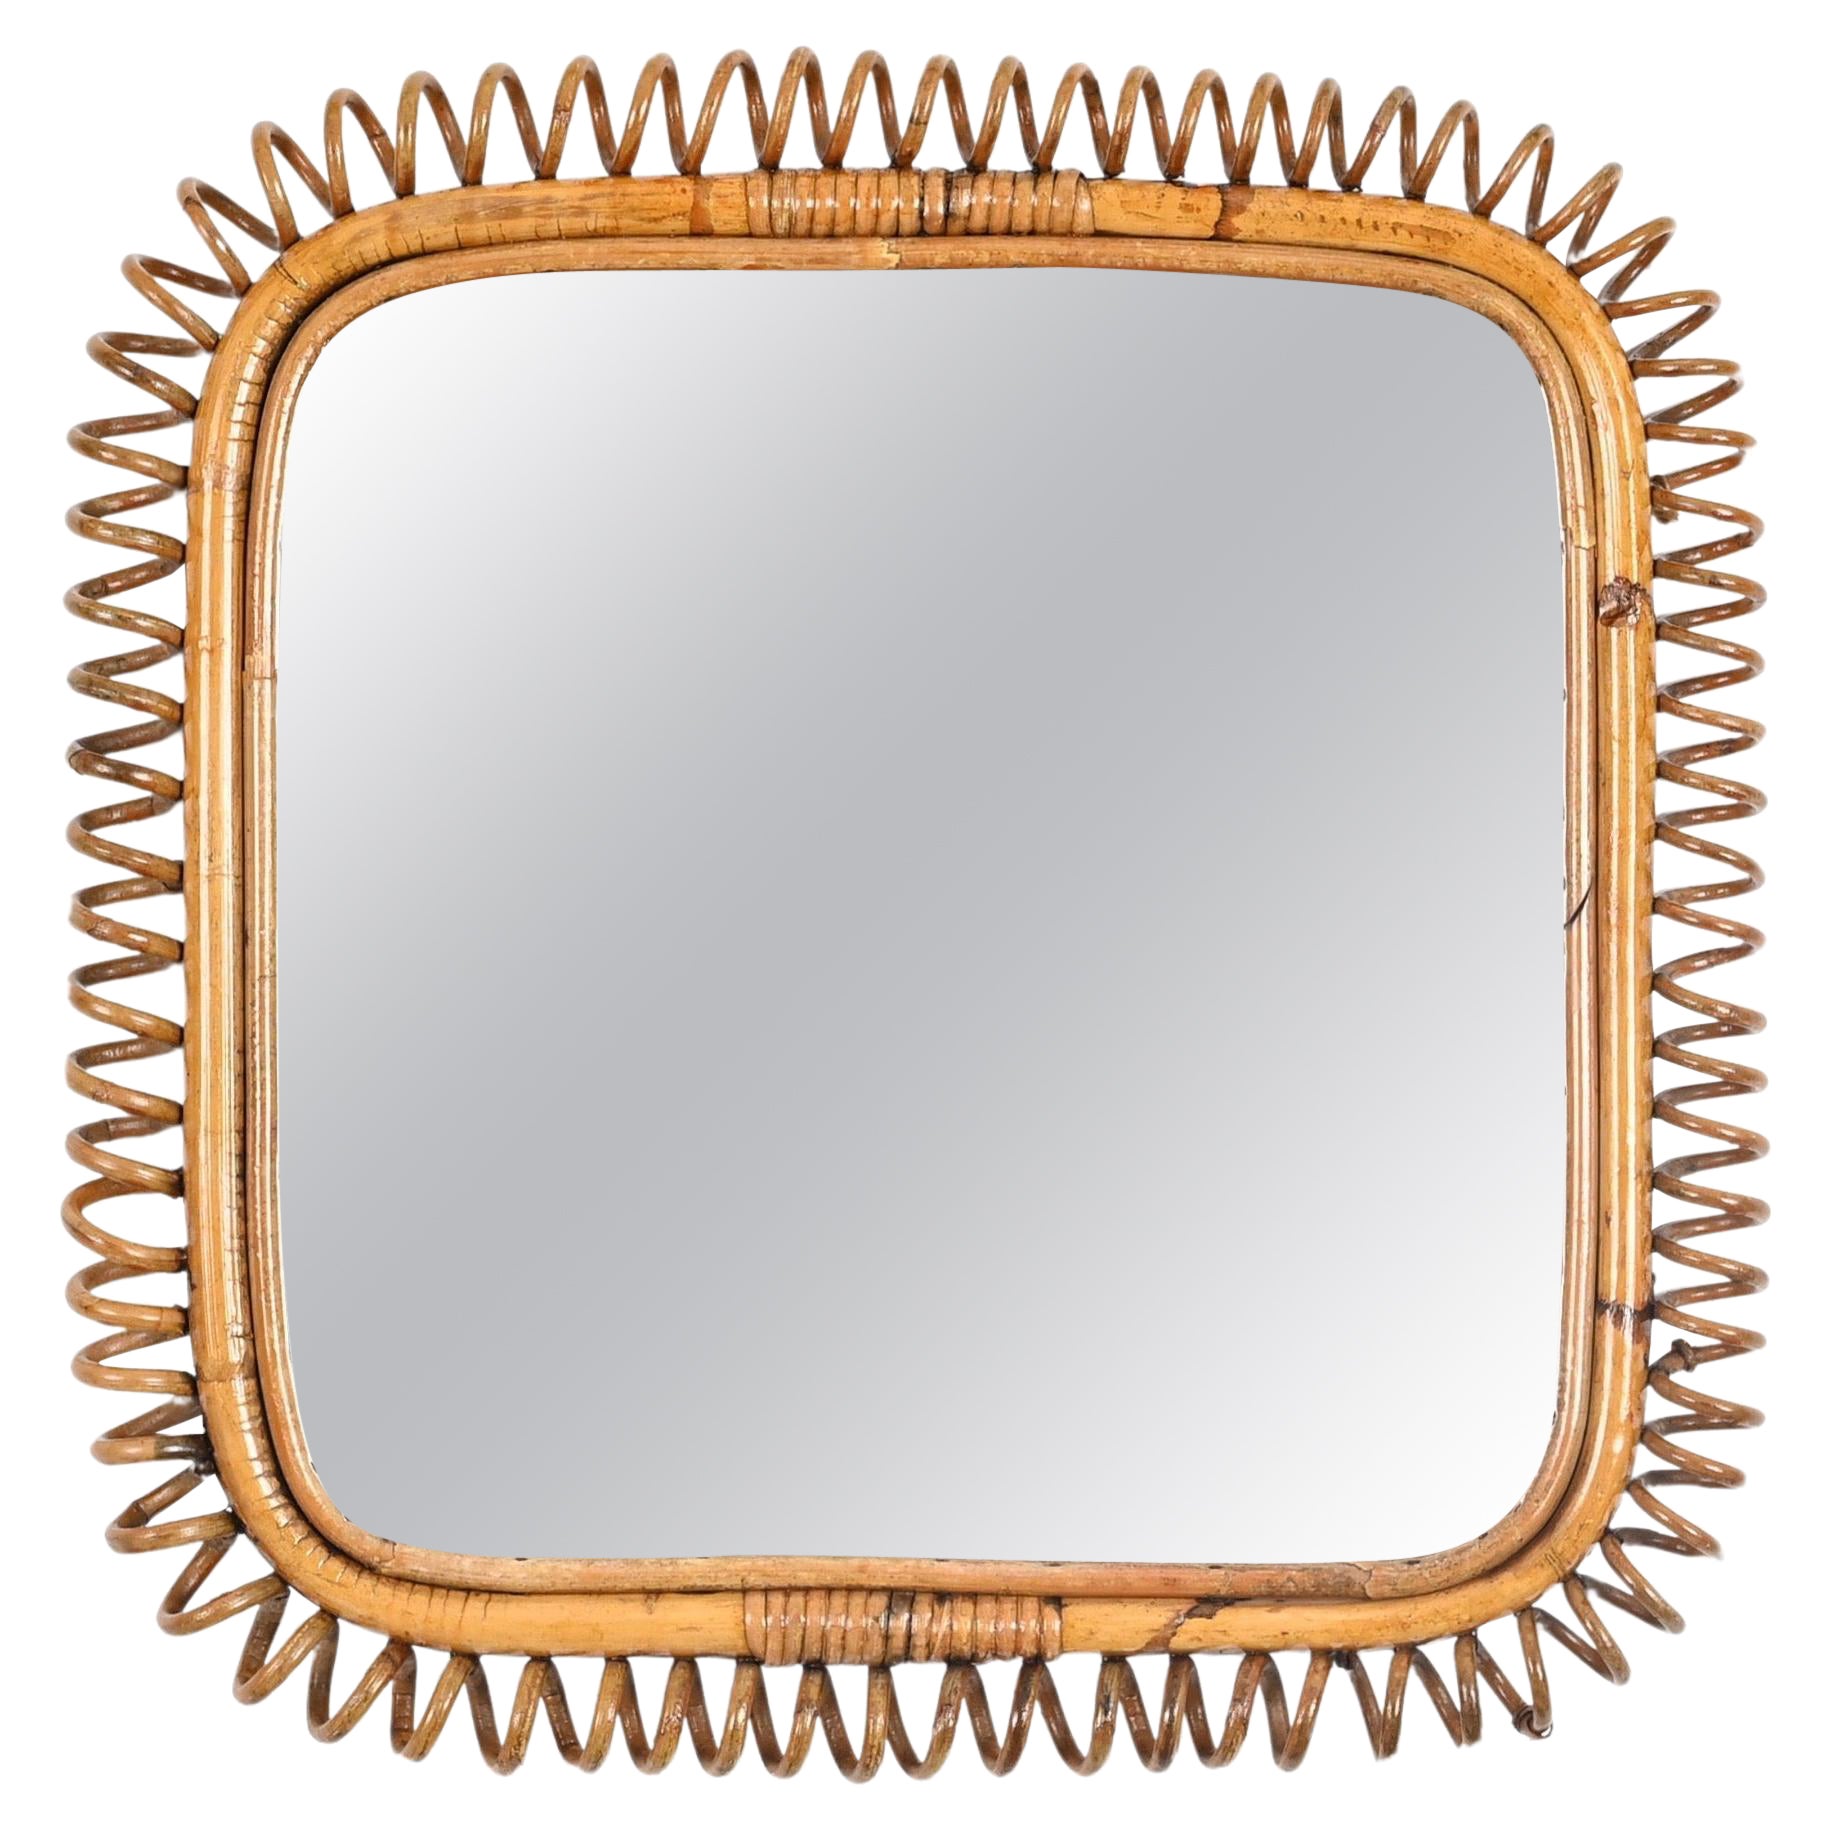 Mid-Century French Riviera Bamboo and Spiral Rattan Square Wall Mirror, 1960s For Sale